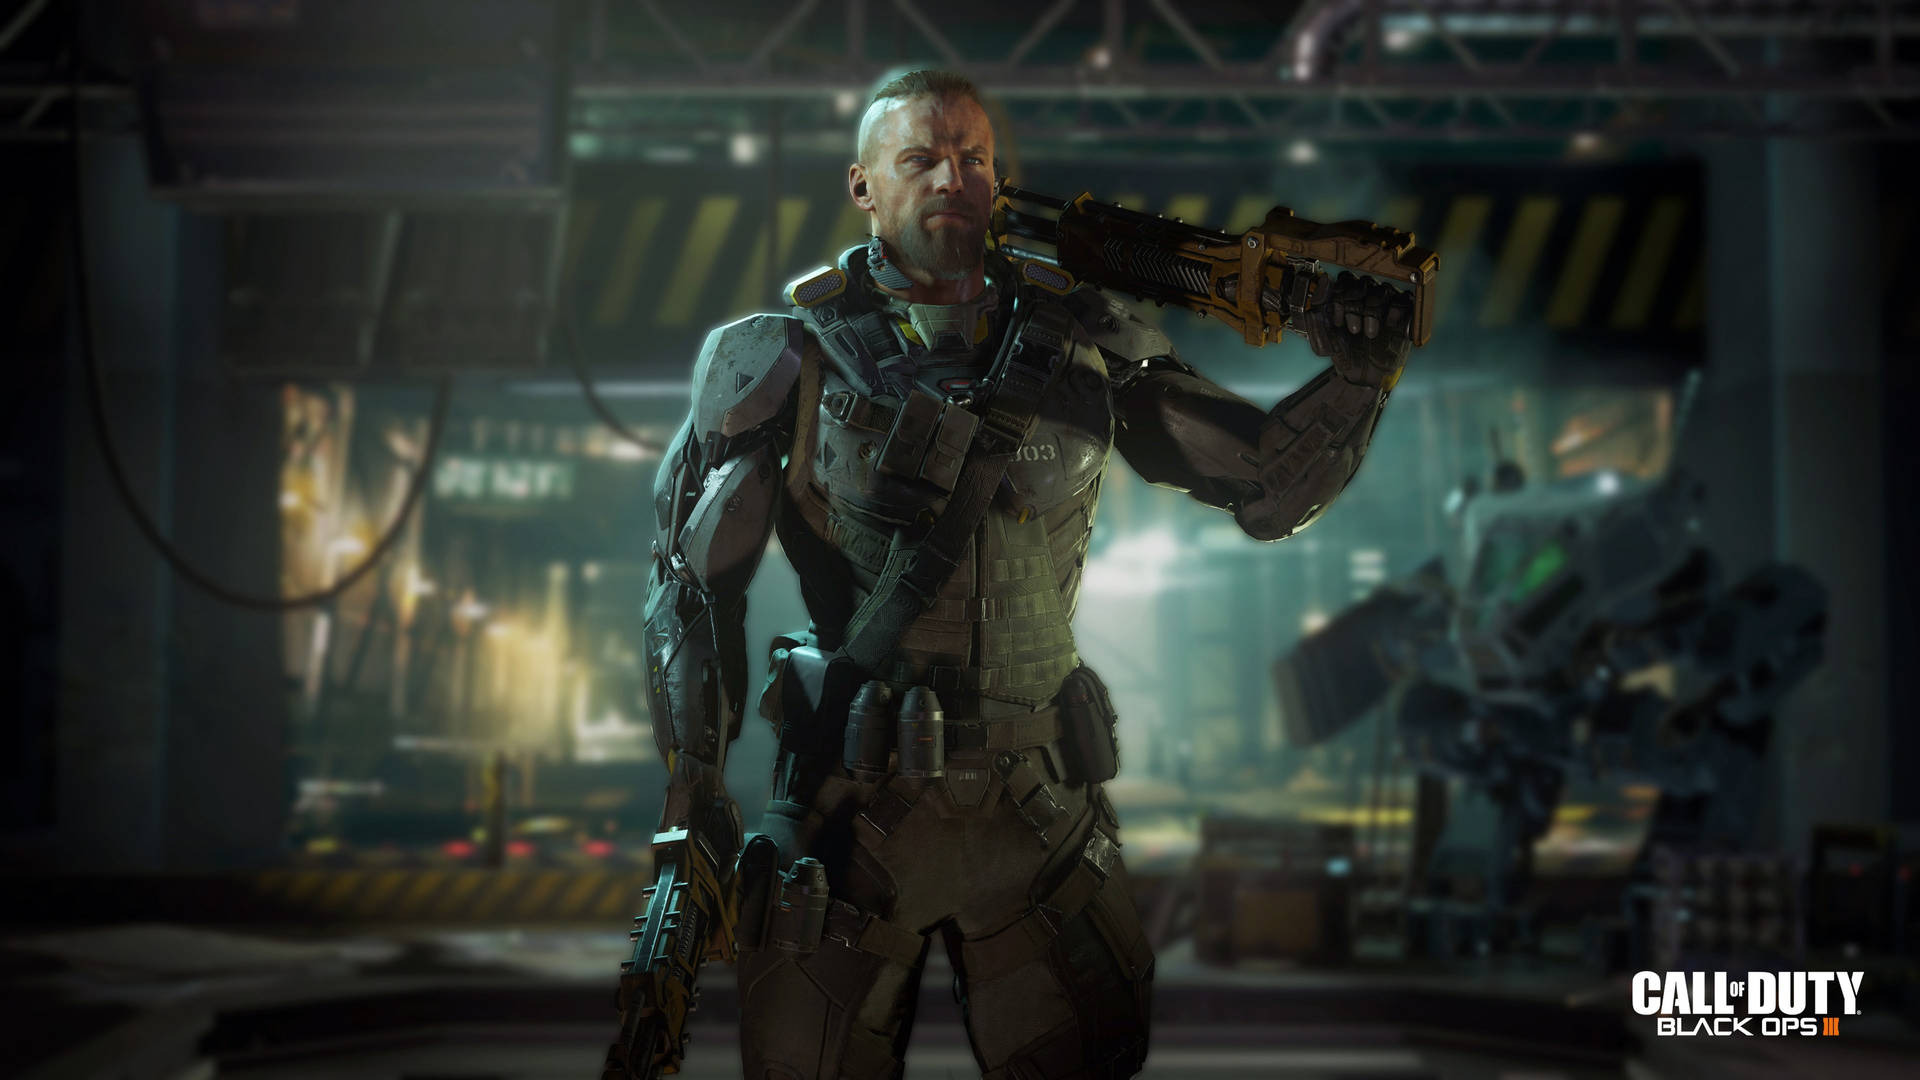 "Prepare For Battle With Call Of Duty Black Ops 3" Wallpaper